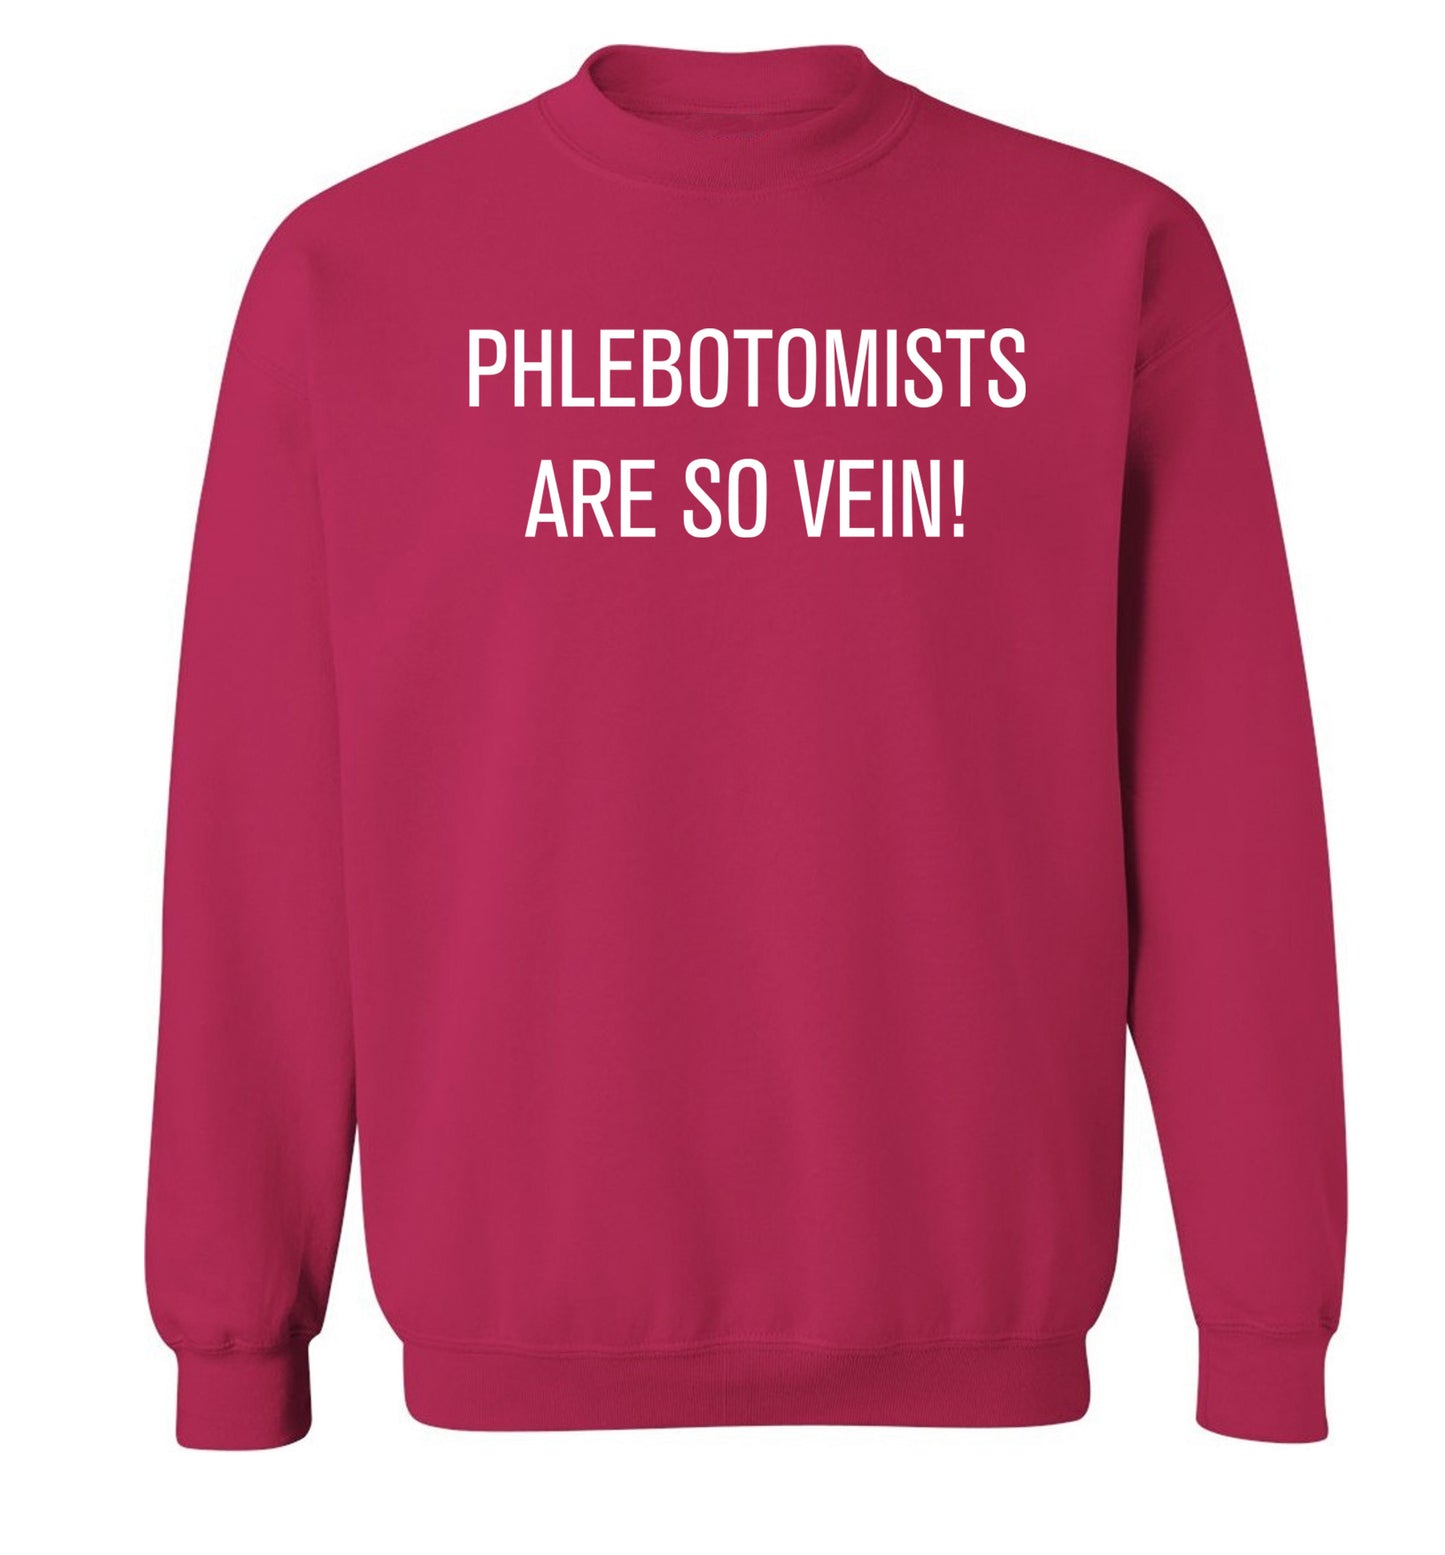 Phlebotomists are so vein! Adult's unisex pink Sweater 2XL